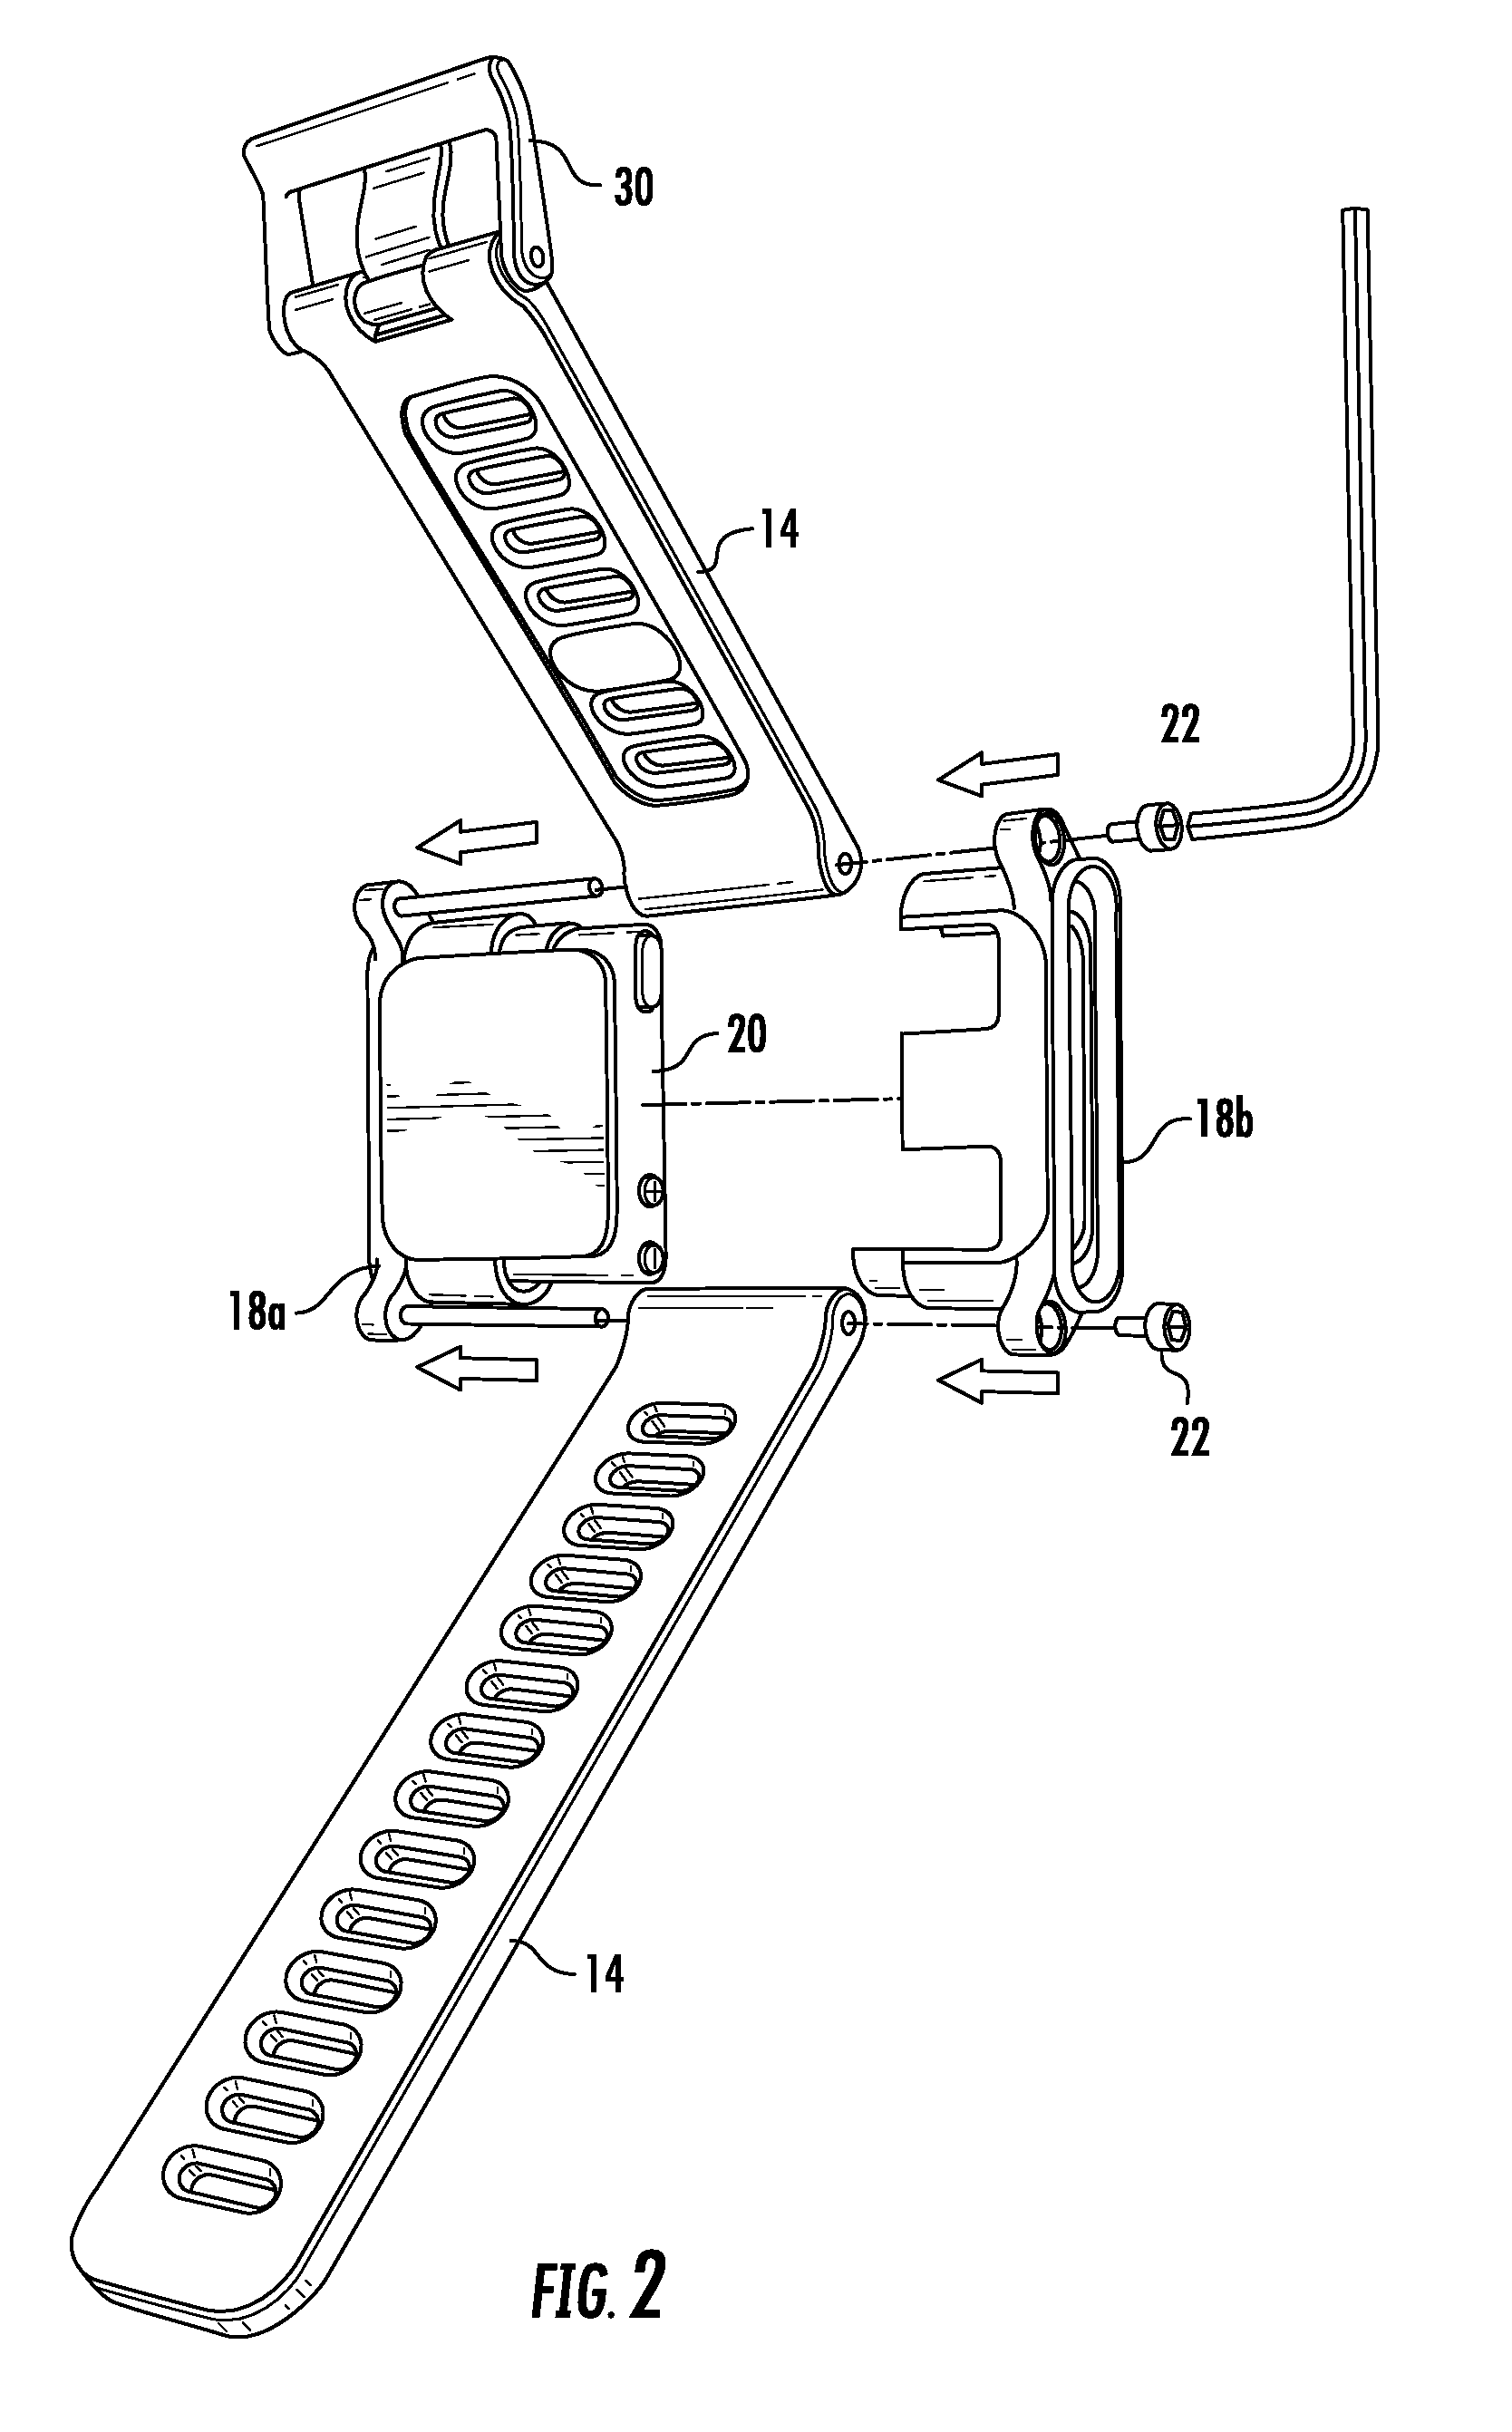 Electronic device casing